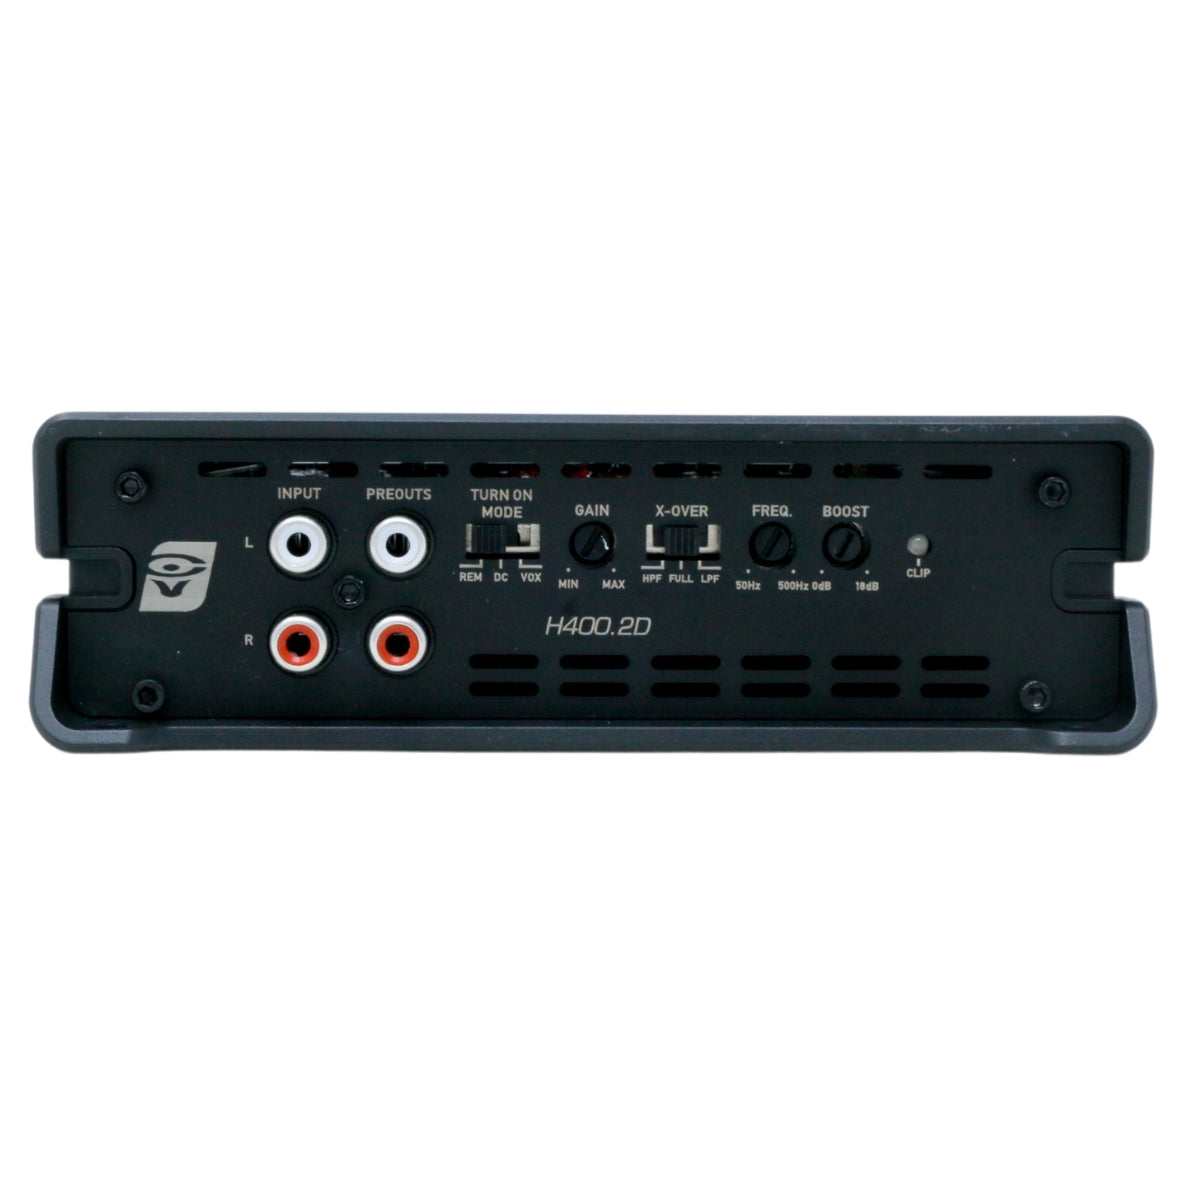 The image shows the control panel of a Cerwin Vega HED 290W RMS Full Range Class-D 2 Channel Digital Amplifier. The panel includes various ports and knobs such as Input ports, Preouts, Turn On Mode switch, Gain control, X-Over switch, Frequency knob, and Bass Boost switch. There are two RCA input jacks and multiple ventilation slots.